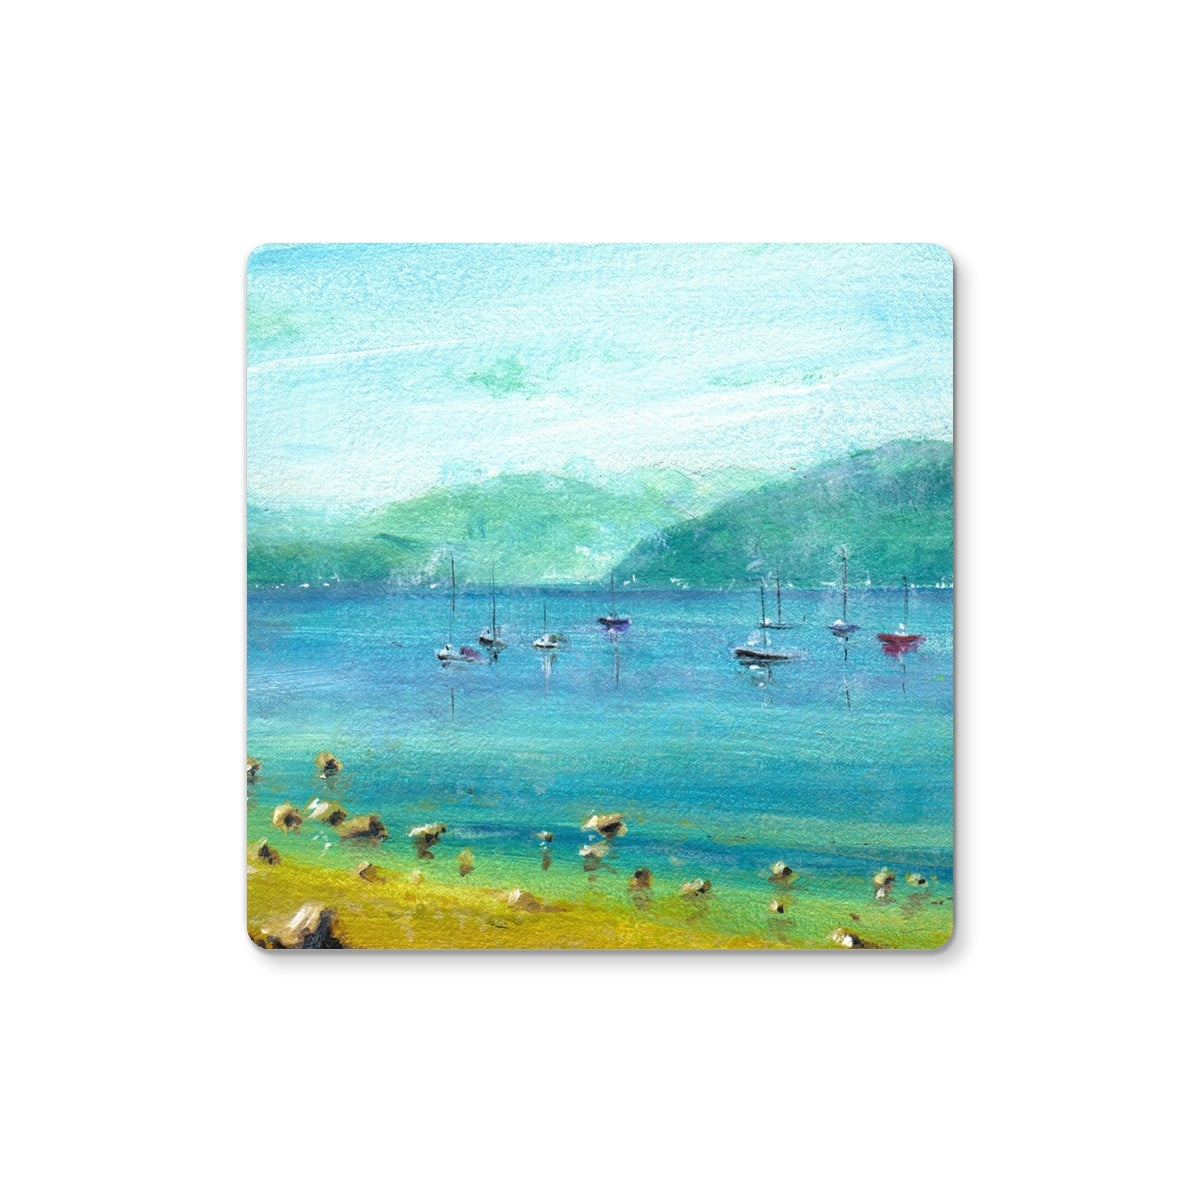 A Clyde Summer Day Art Gifts Coaster-Homeware-River Clyde Art Gallery-Single Coaster-Paintings, Prints, Homeware, Art Gifts From Scotland By Scottish Artist Kevin Hunter